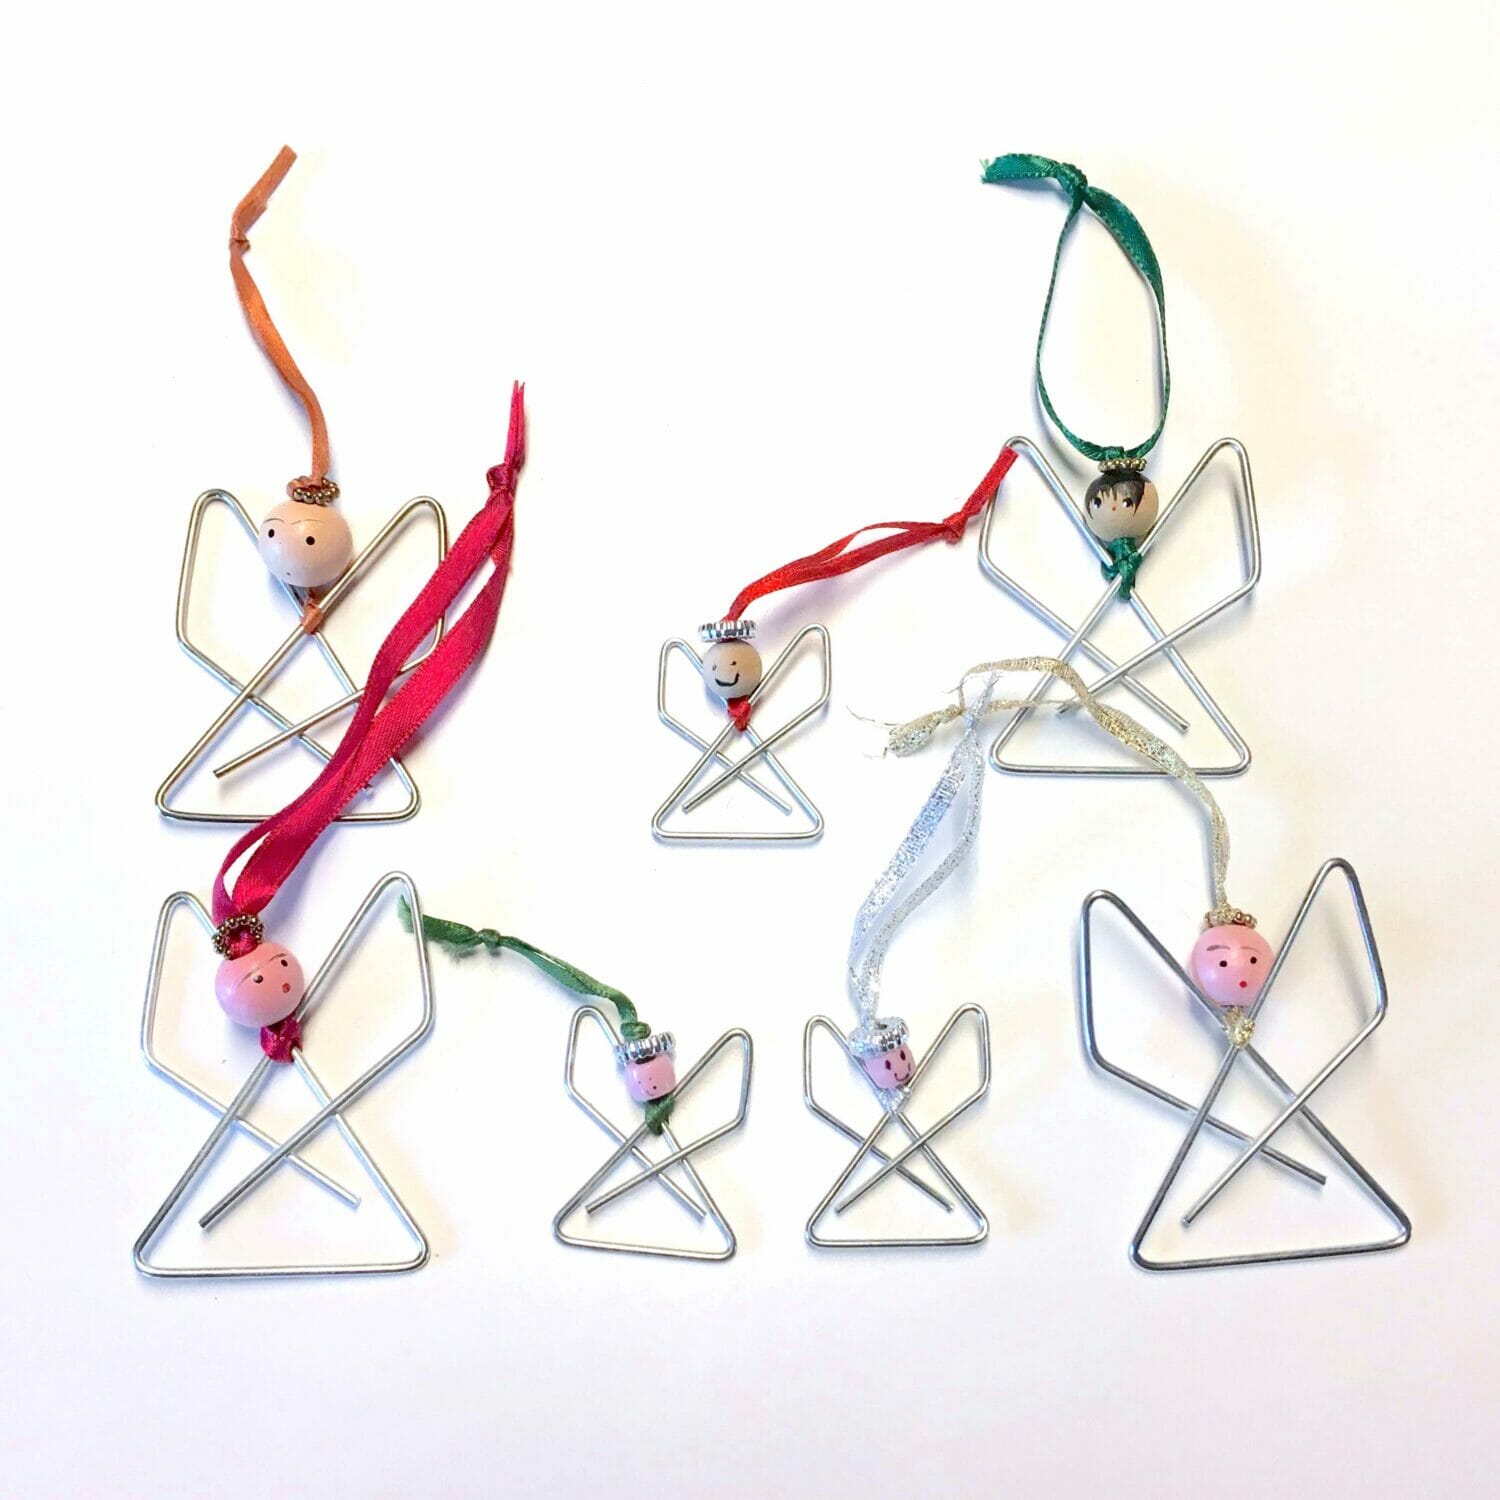 https://supermomhacks.com/wp-content/uploads/2016/12/bright-paperclip-angels-homemade-Christmas-ornaments.jpg